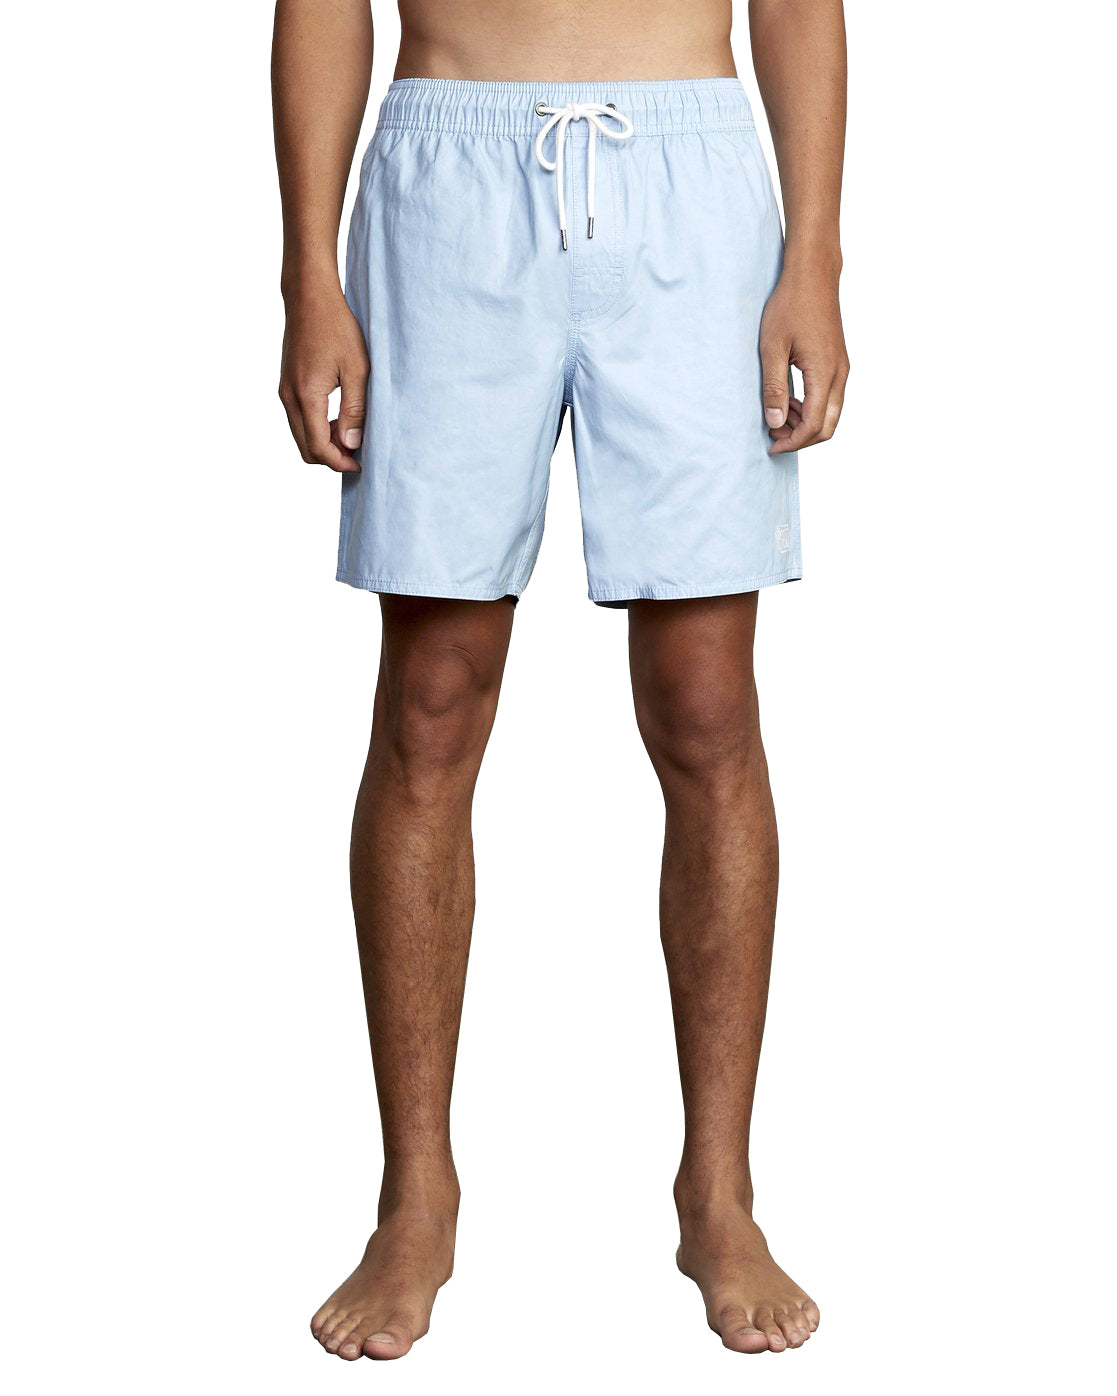 RVCA Opposites Elastic Short PAB-PacificBlue S